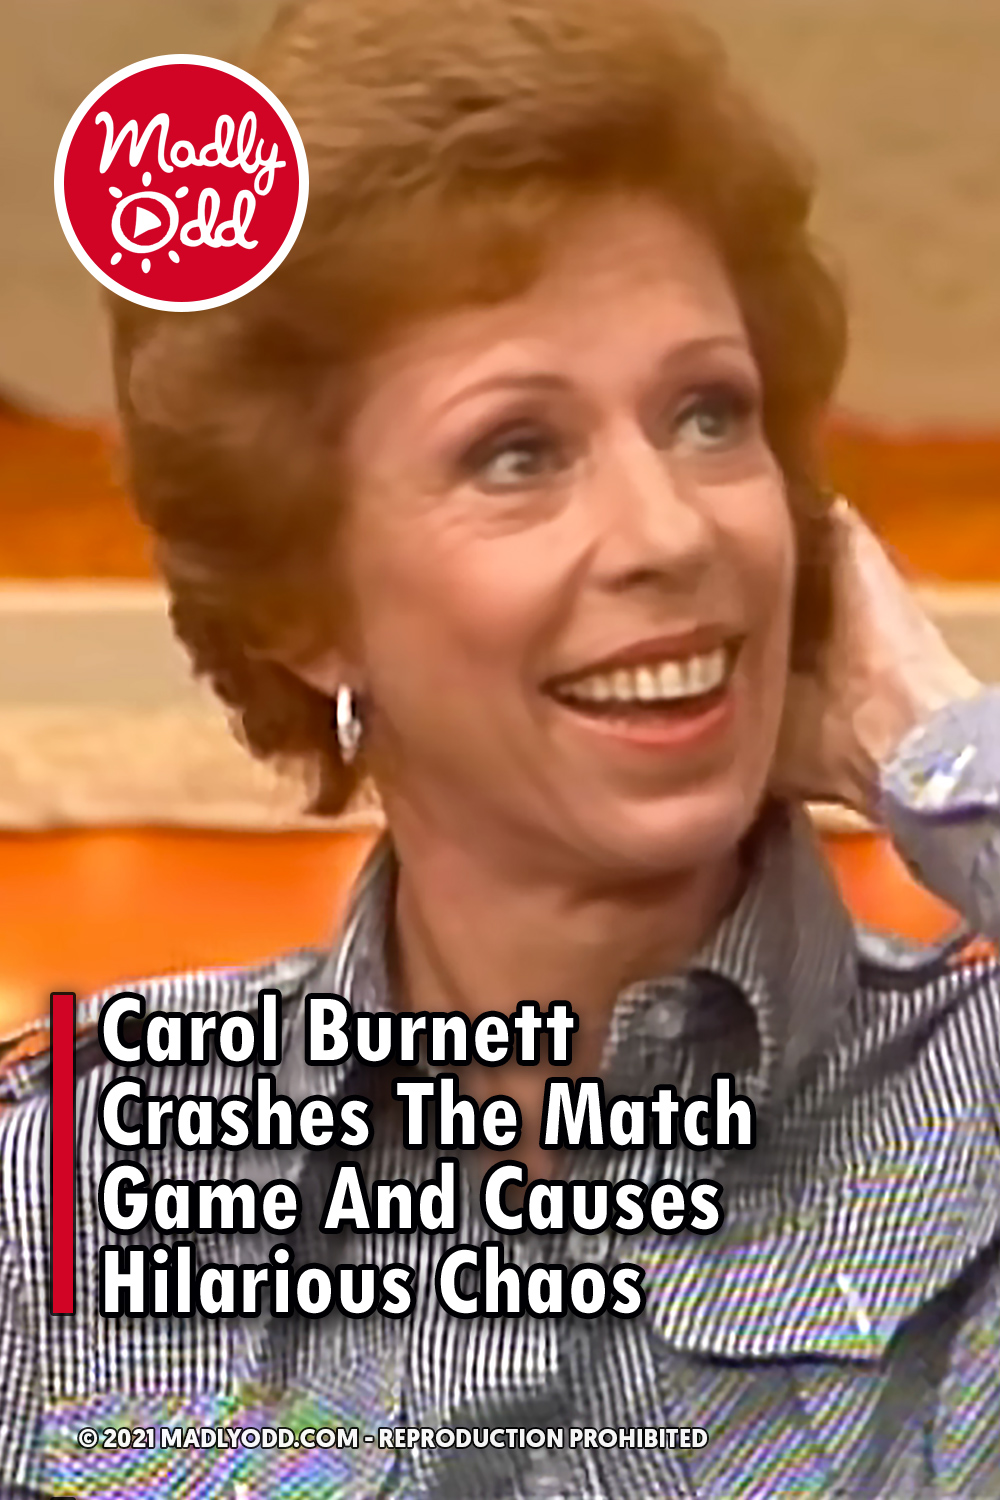 Carol Burnett Crashes The Match Game And Causes Hilarious Chaos